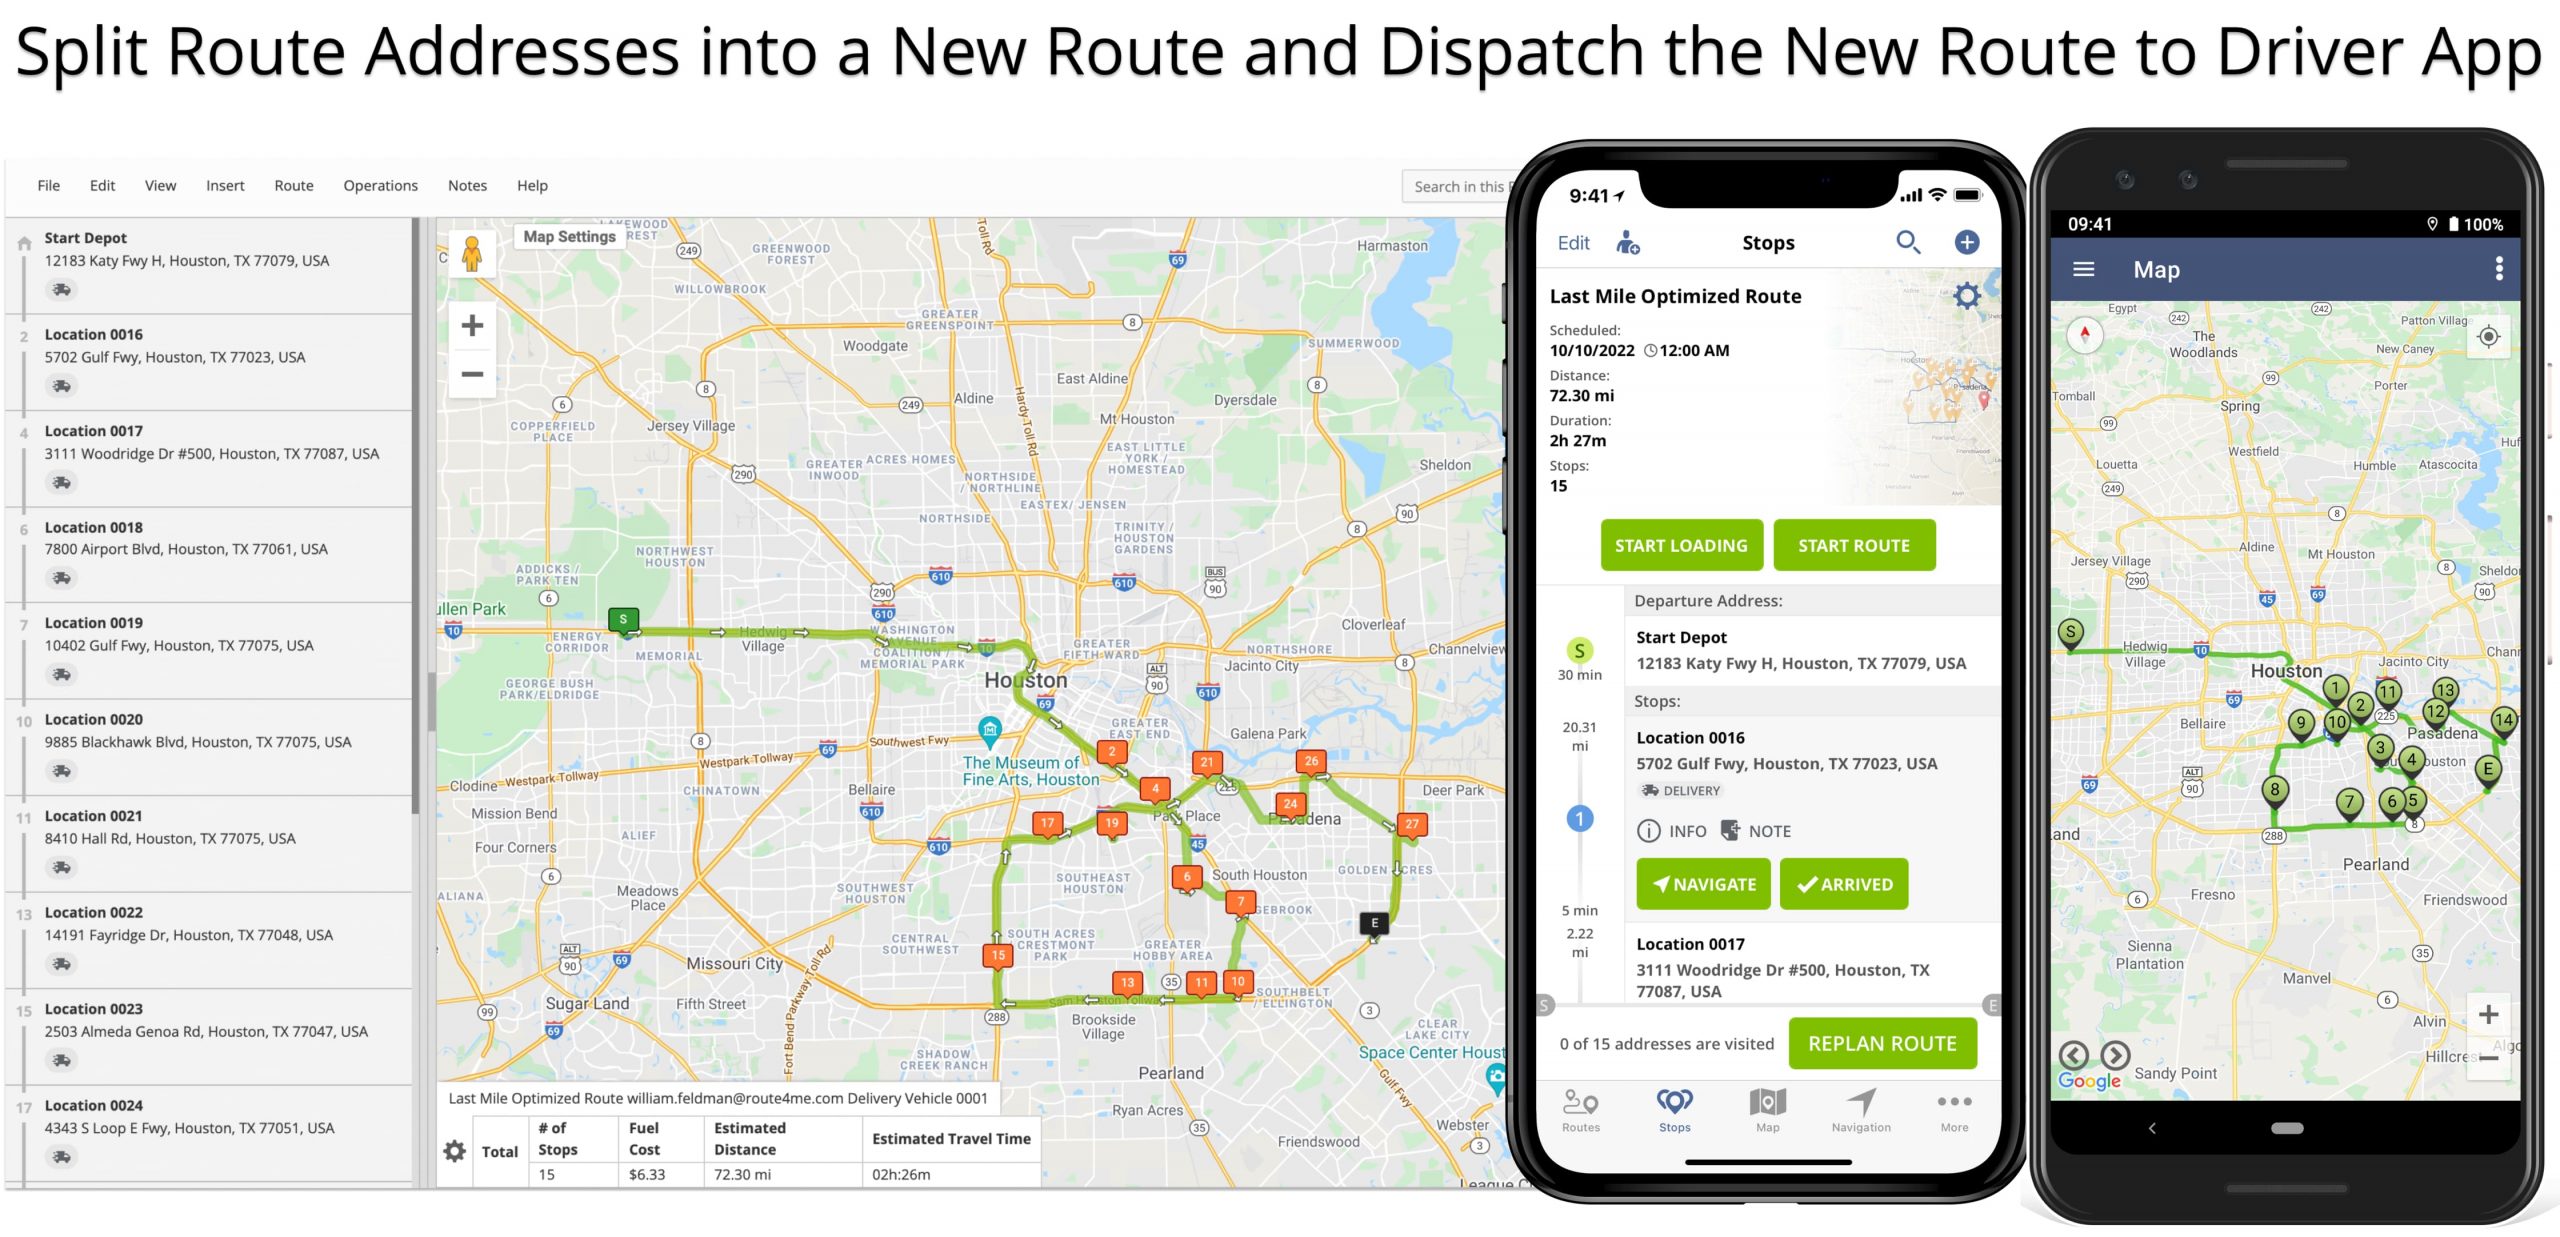 Dispatch split route to driver mobile app from the Web route planner. 